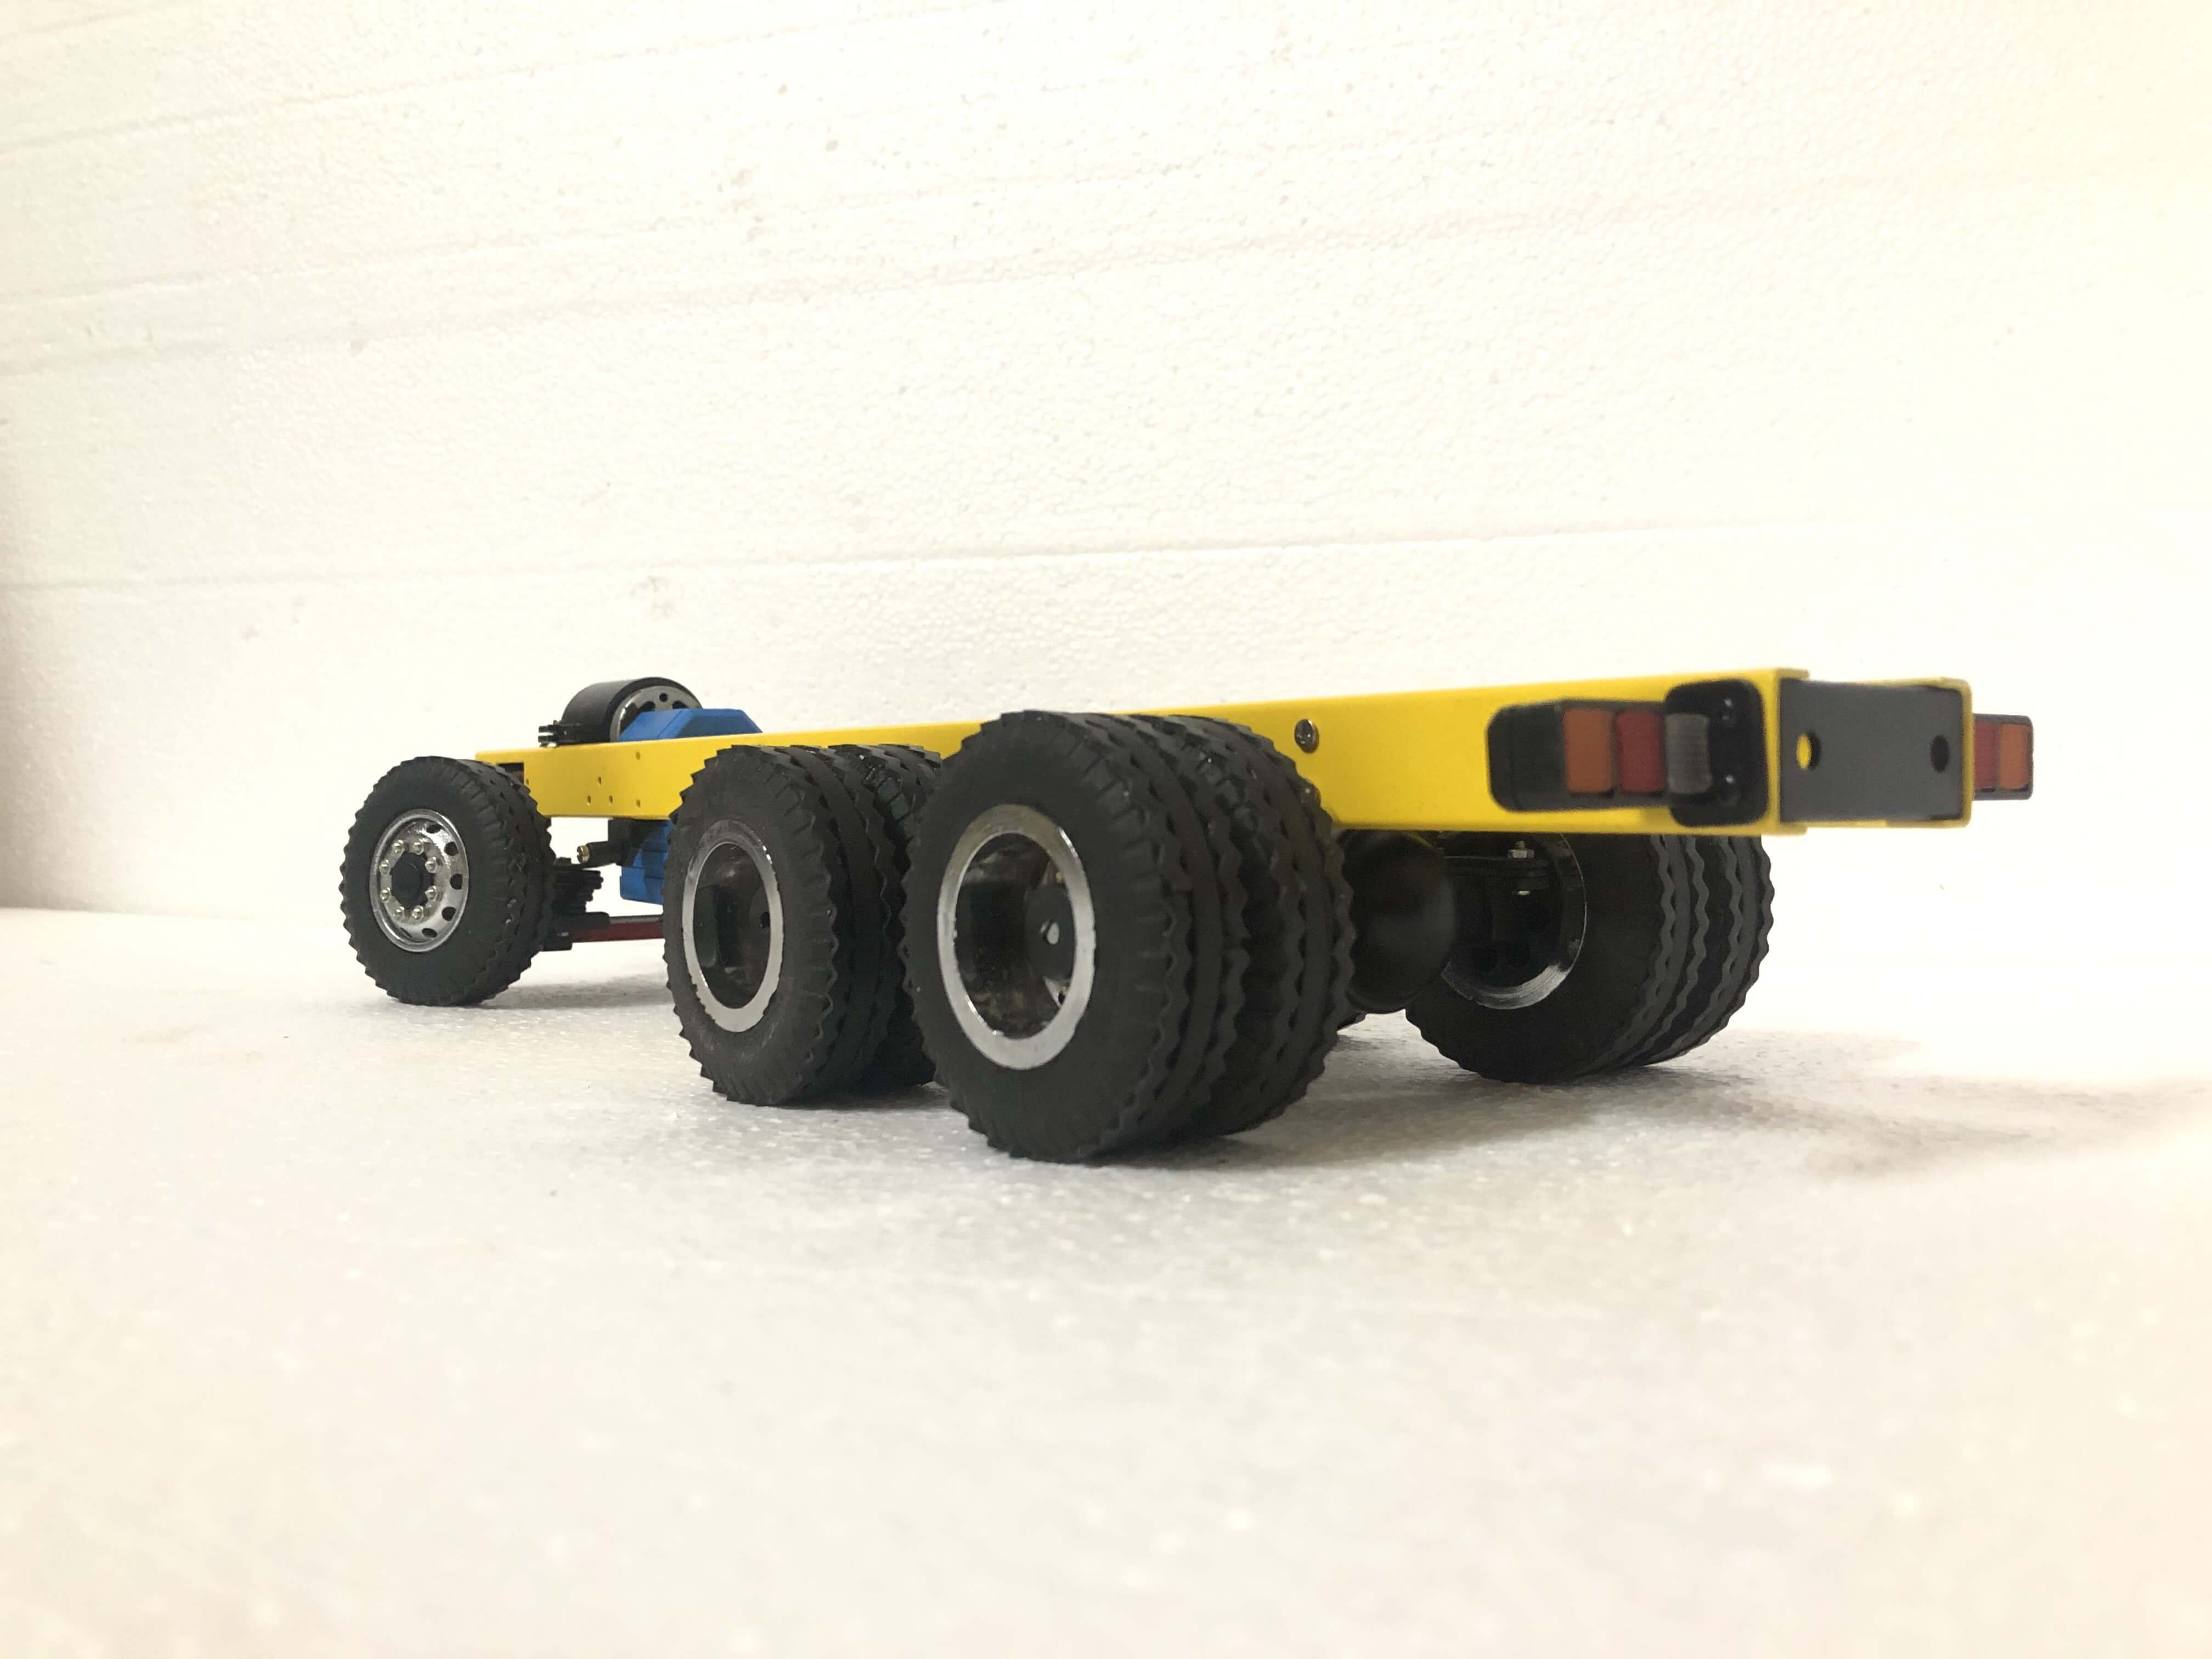 10 Wheel Chassis with Motor-gearbox and Steering Servo (Rear Multi-Axle Drive) (Scale 1:18)